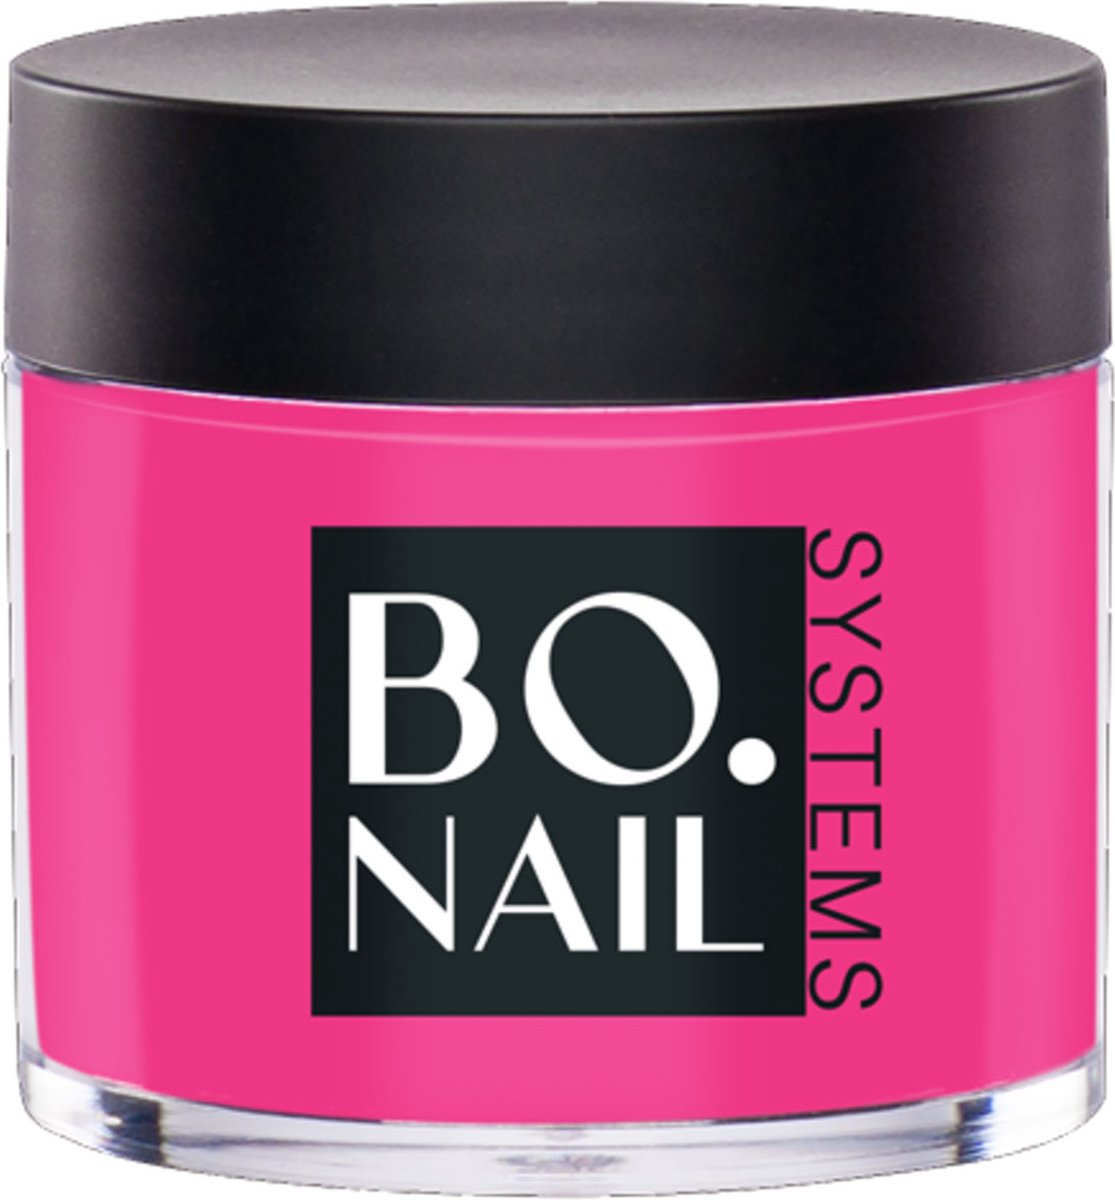 BO.Nail - Dip - #016 It's Your Color - 25 gr